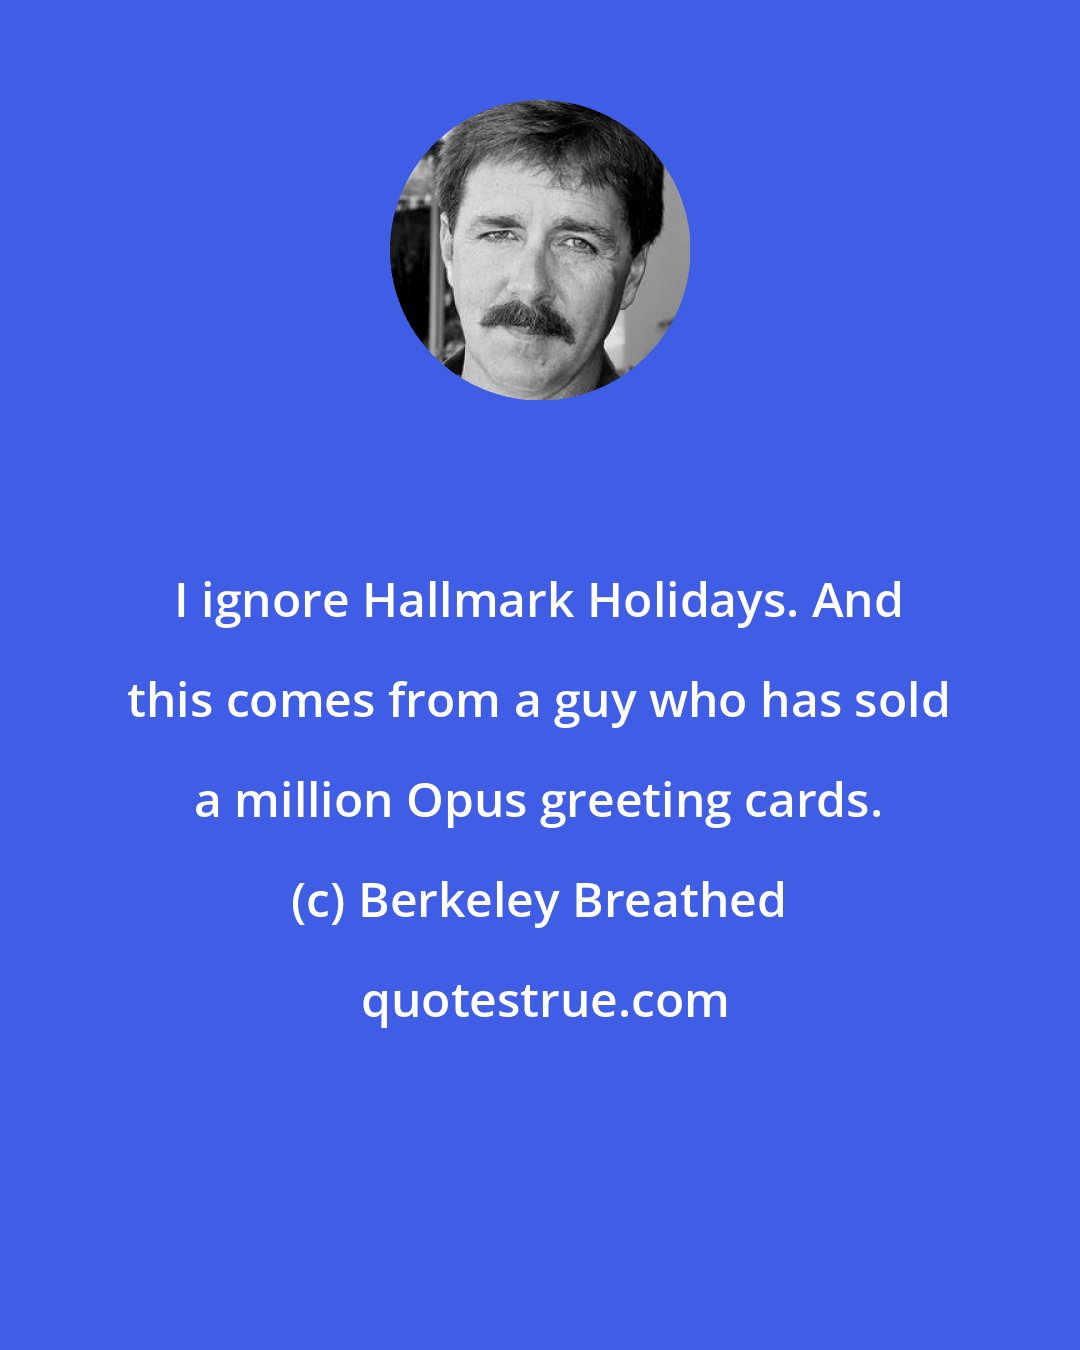 Berkeley Breathed: I ignore Hallmark Holidays. And this comes from a guy who has sold a million Opus greeting cards.